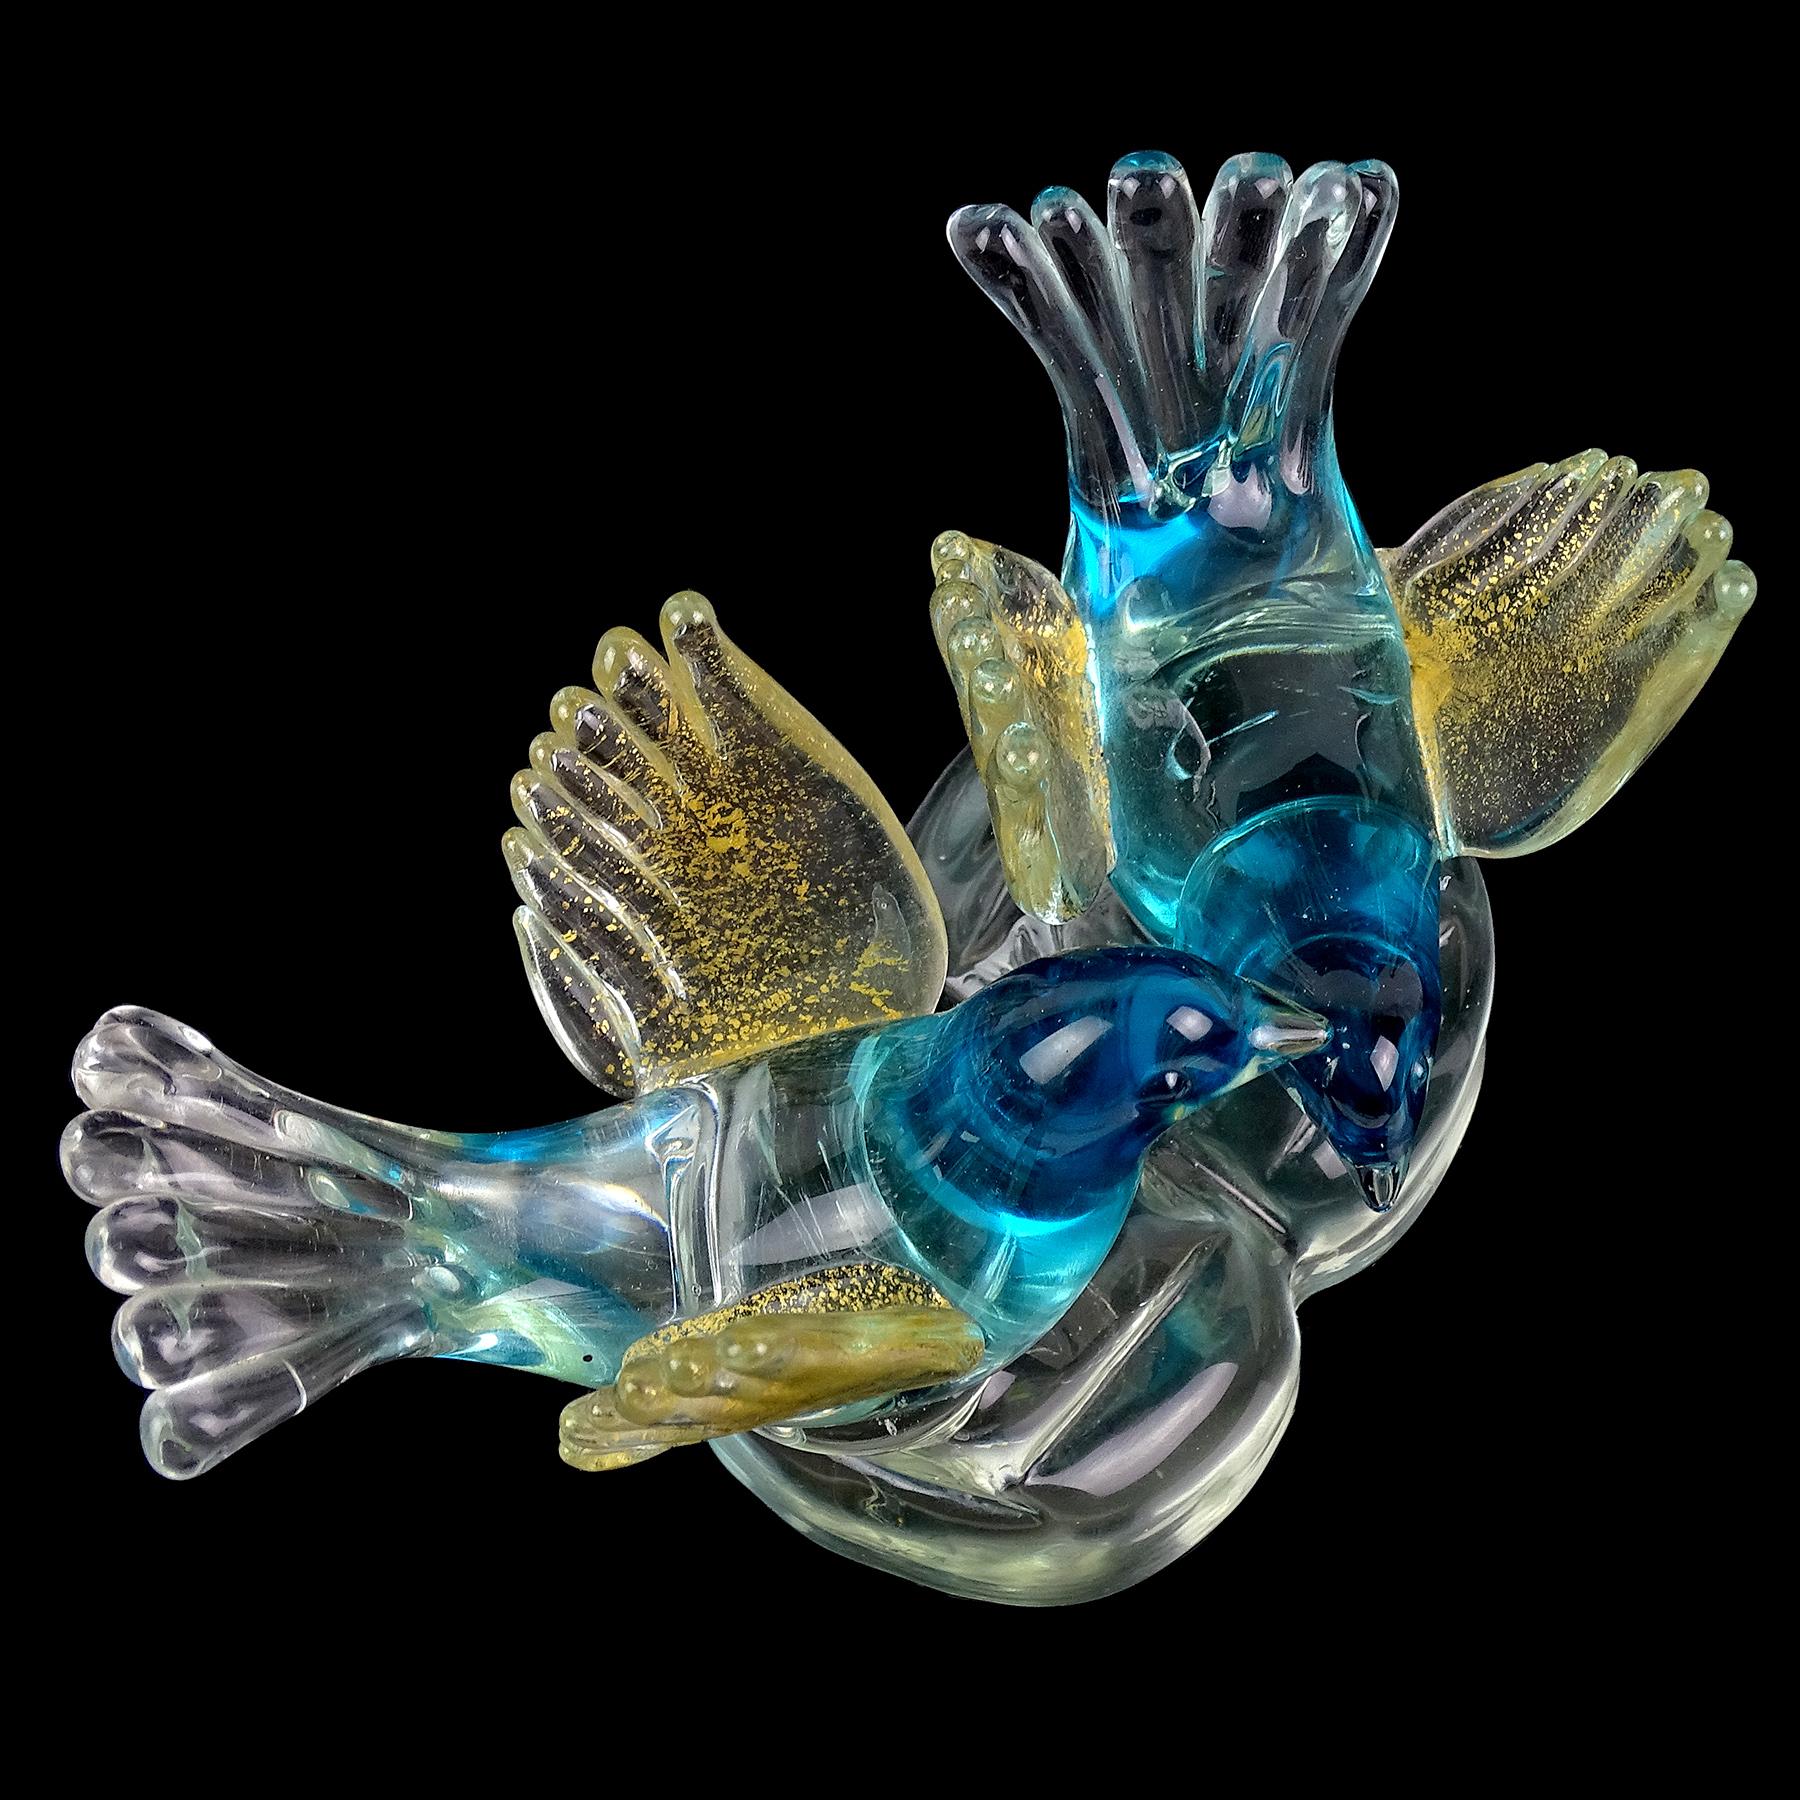 Hand-Crafted Murano Sommerso Aqua Blue Gold Leaf Italian Art Glass Bird Figures Paperweight For Sale